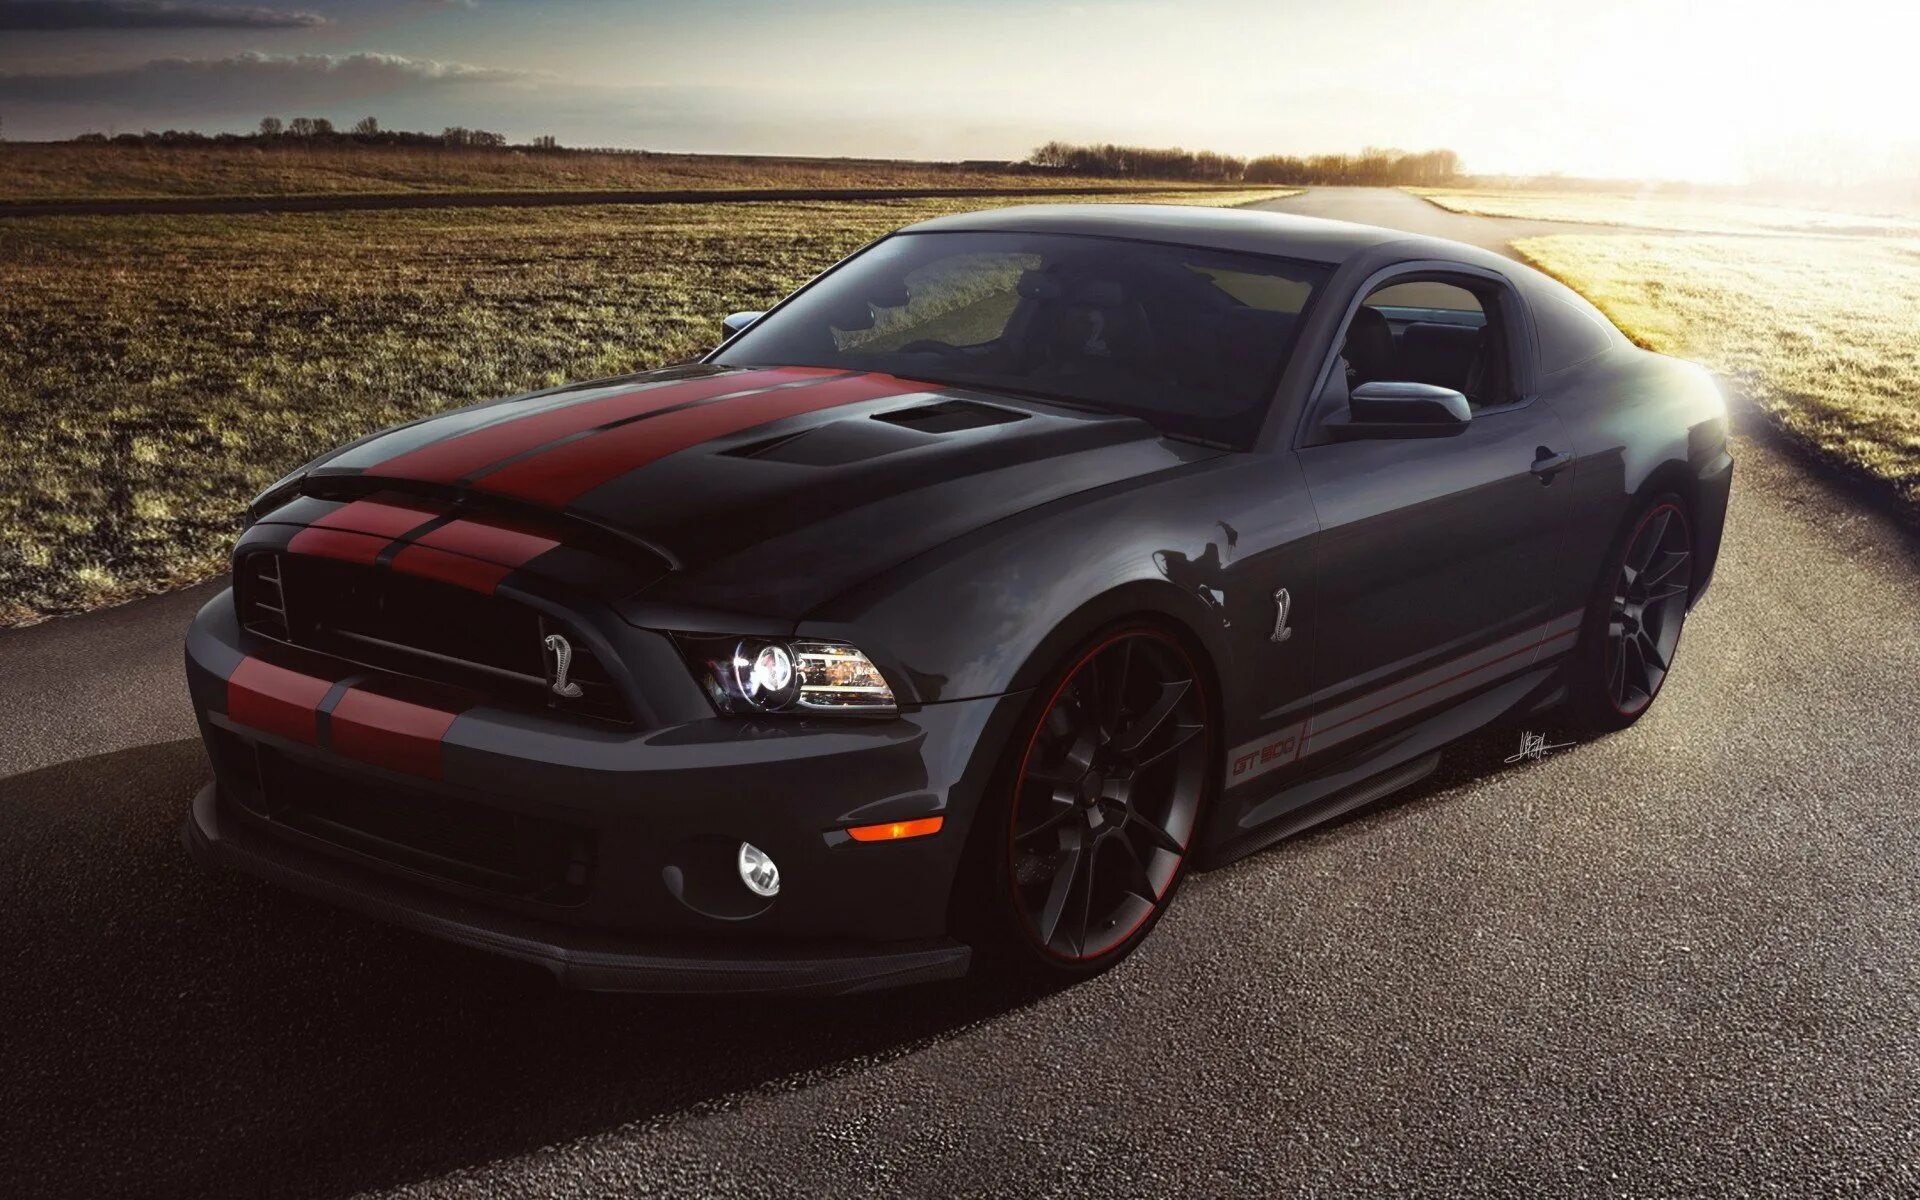 Ford Mustang Shelby gt. Форд Мустанг черный. Ford Mustang Shelby gt черный. Форд Мустанг 240. Стол мустанг